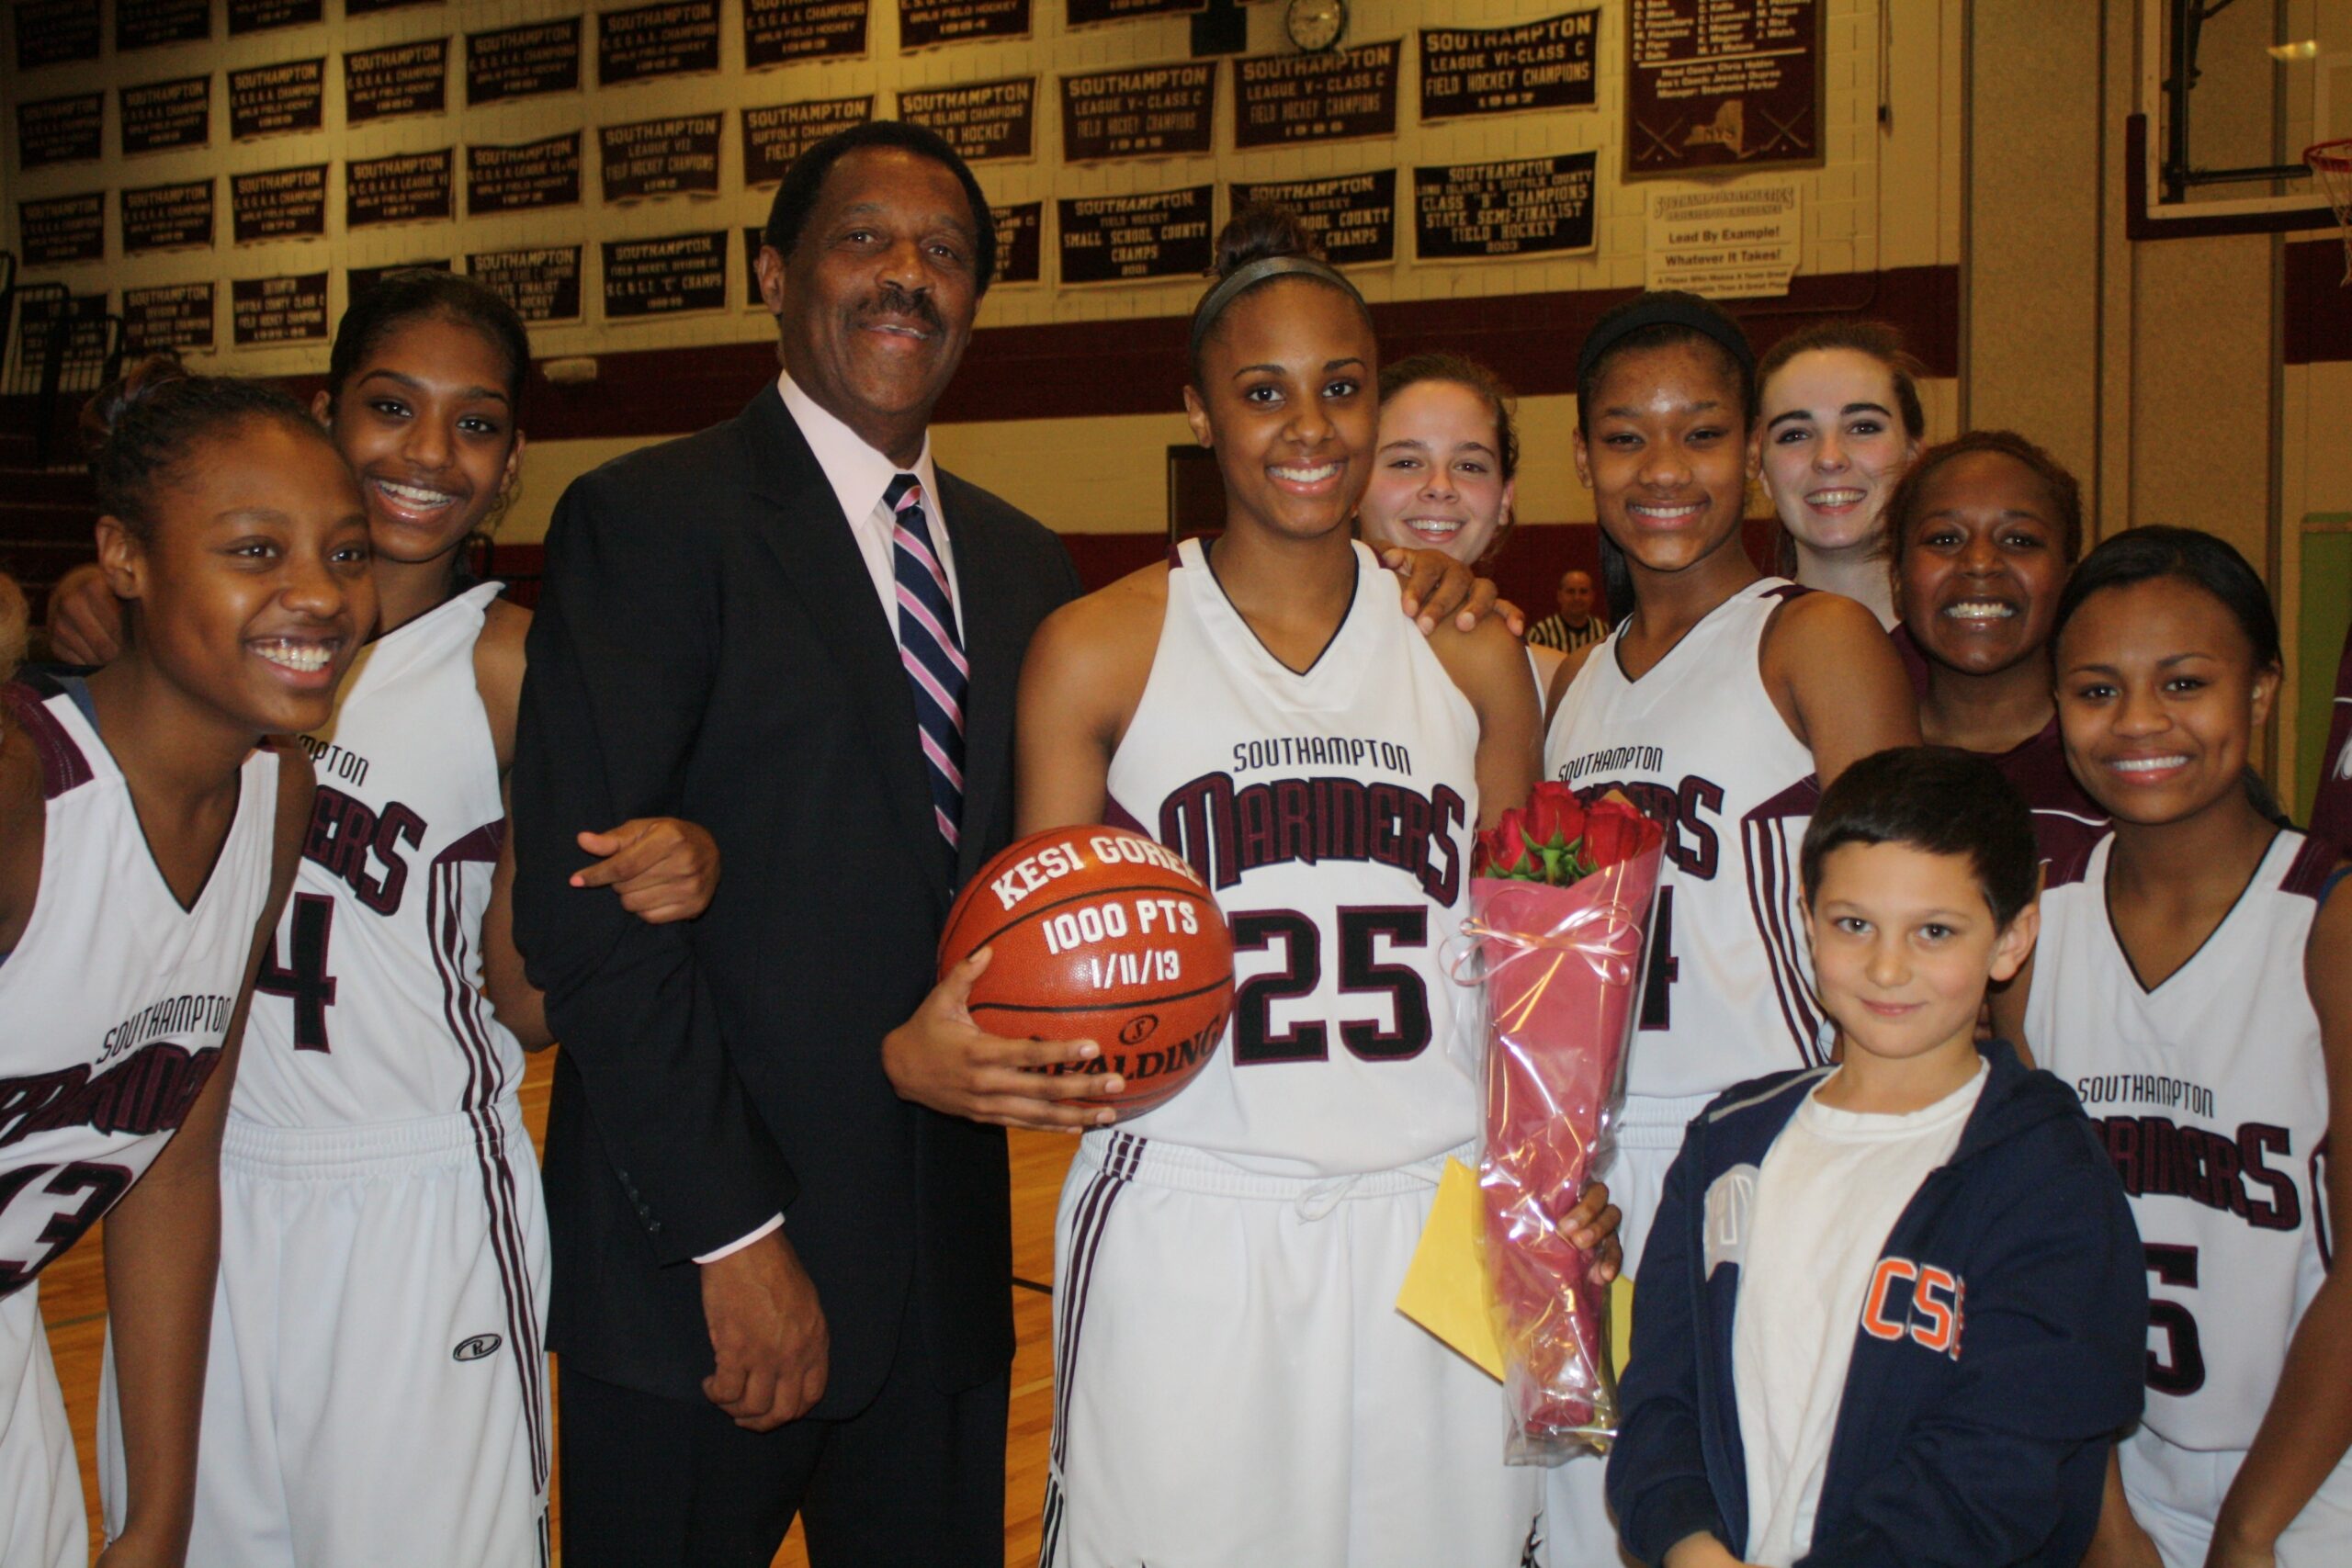 Former Southampton girls basketball player Kesi Goree, after scoring her 1,000th career point. Goree was one of several players on Mariners teams that won back-to-back county and Long Island Championships. EXPRESS ARCHIVES